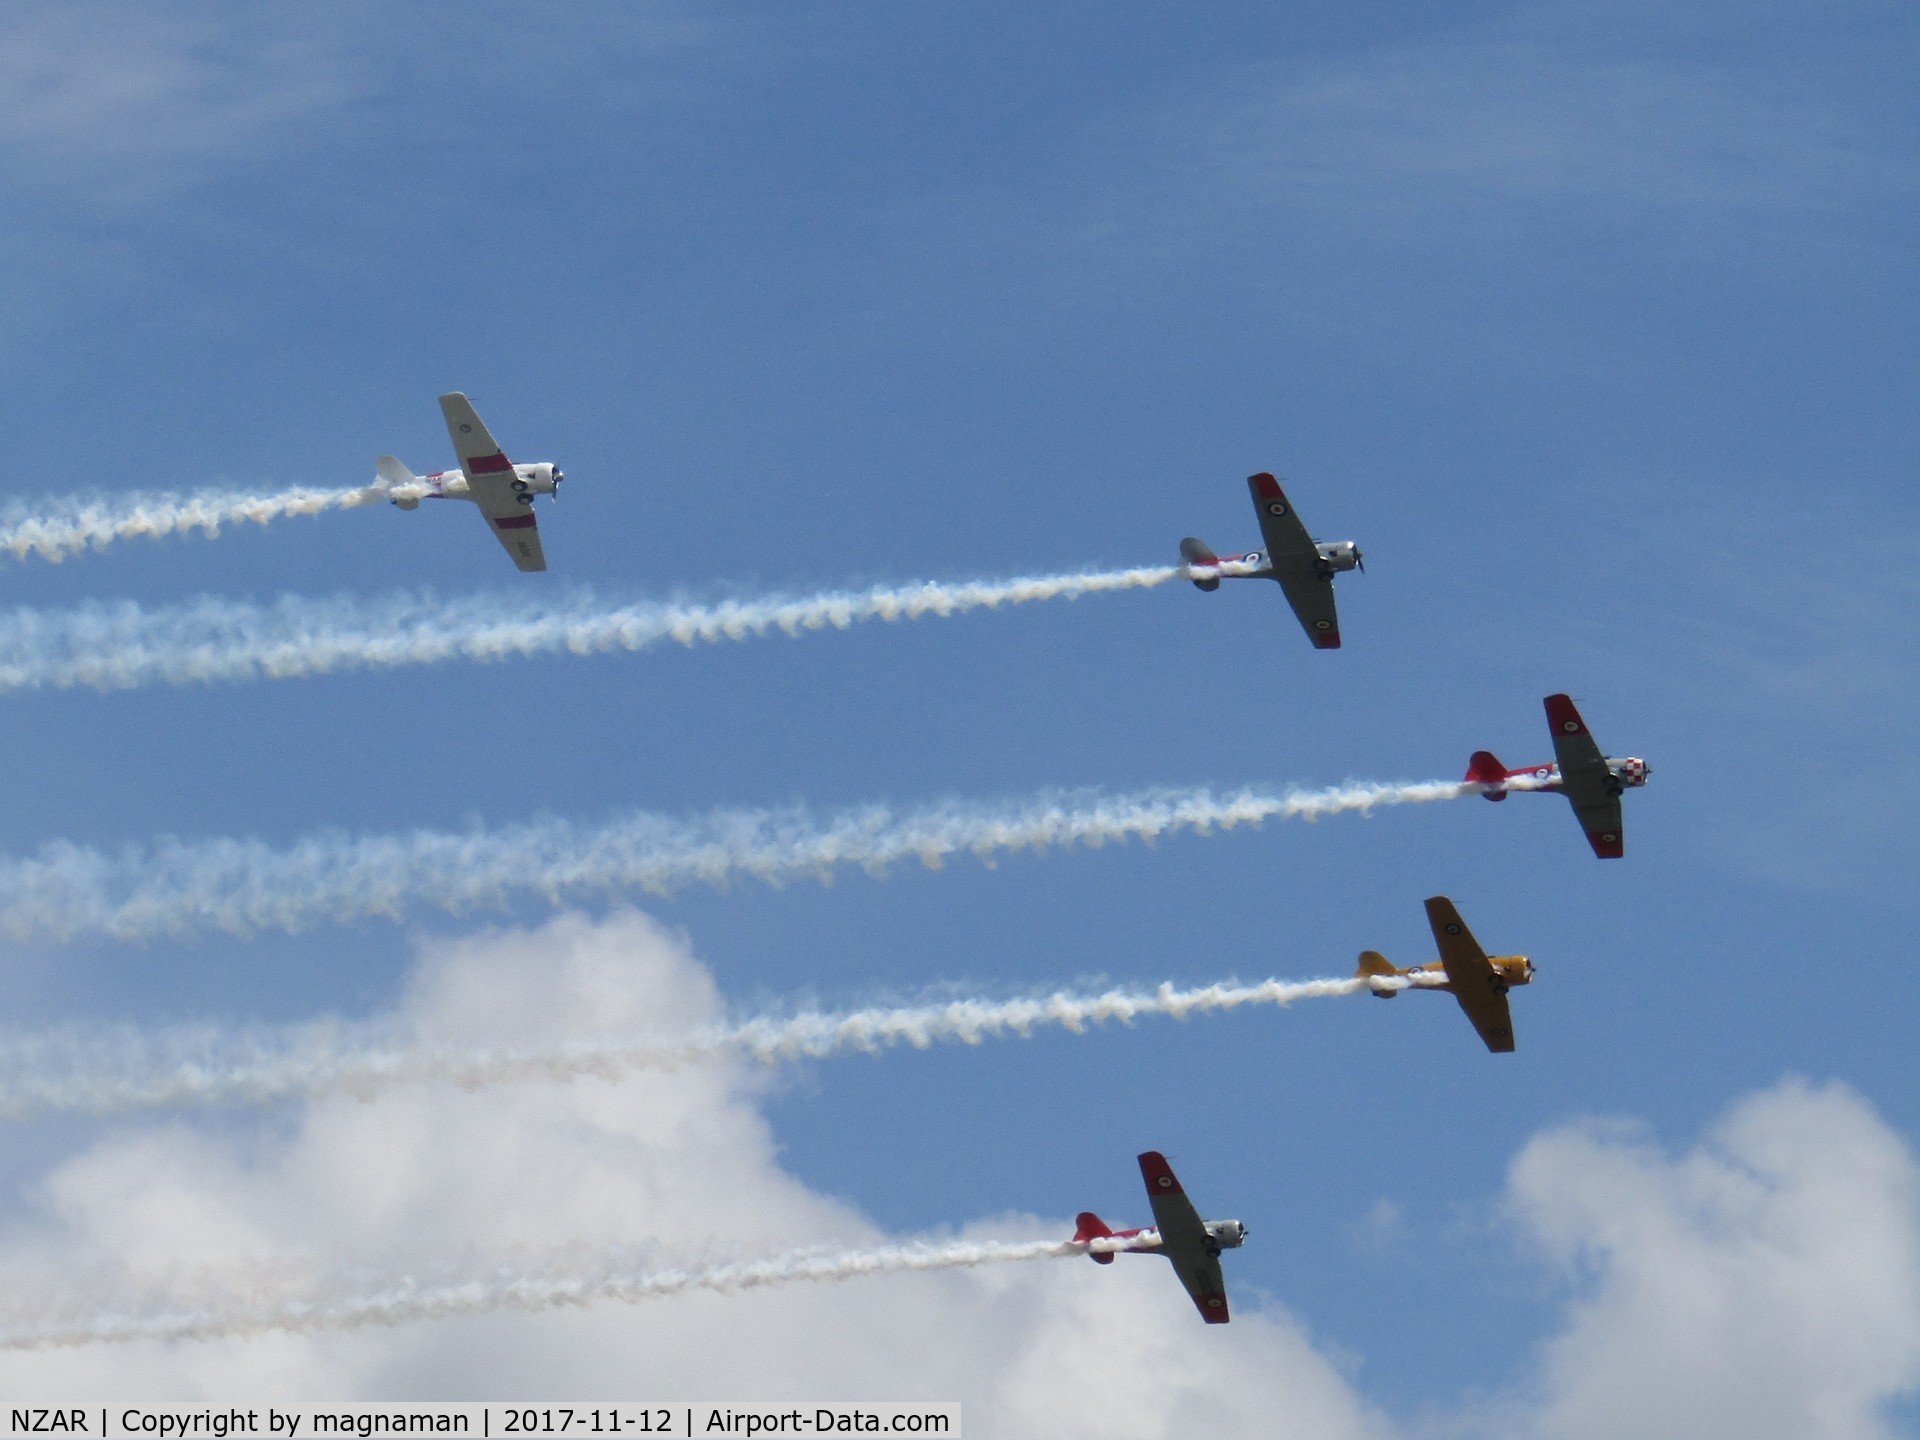 Ardmore Airport, Auckland New Zealand (NZAR) - local harvards out for show